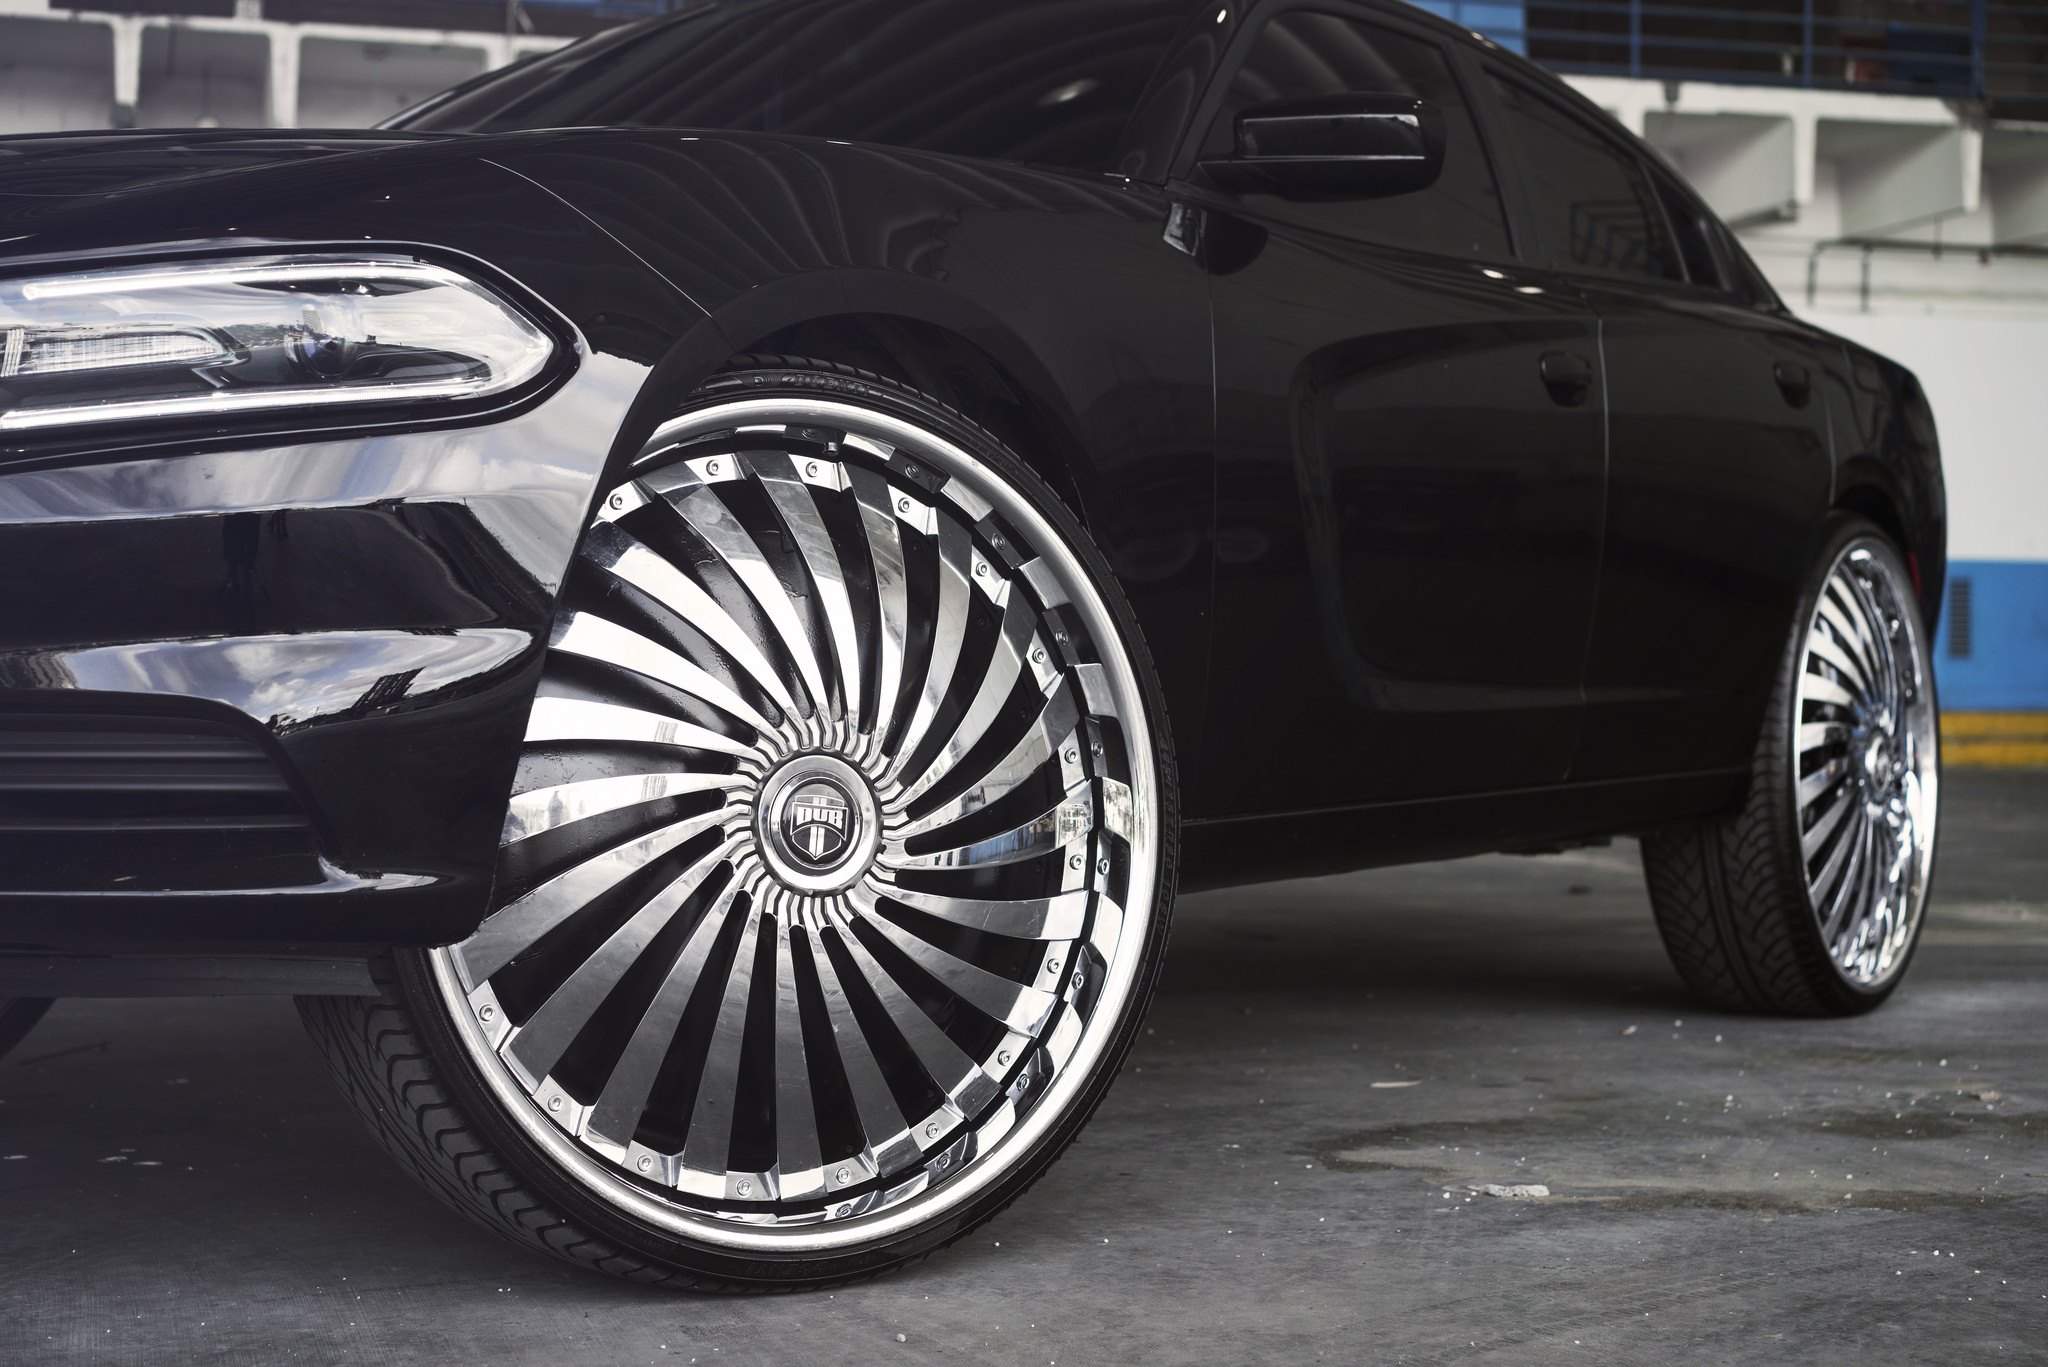 30 Inch Swyrl DUB Rims on Dodge Charger - Photo by DUB